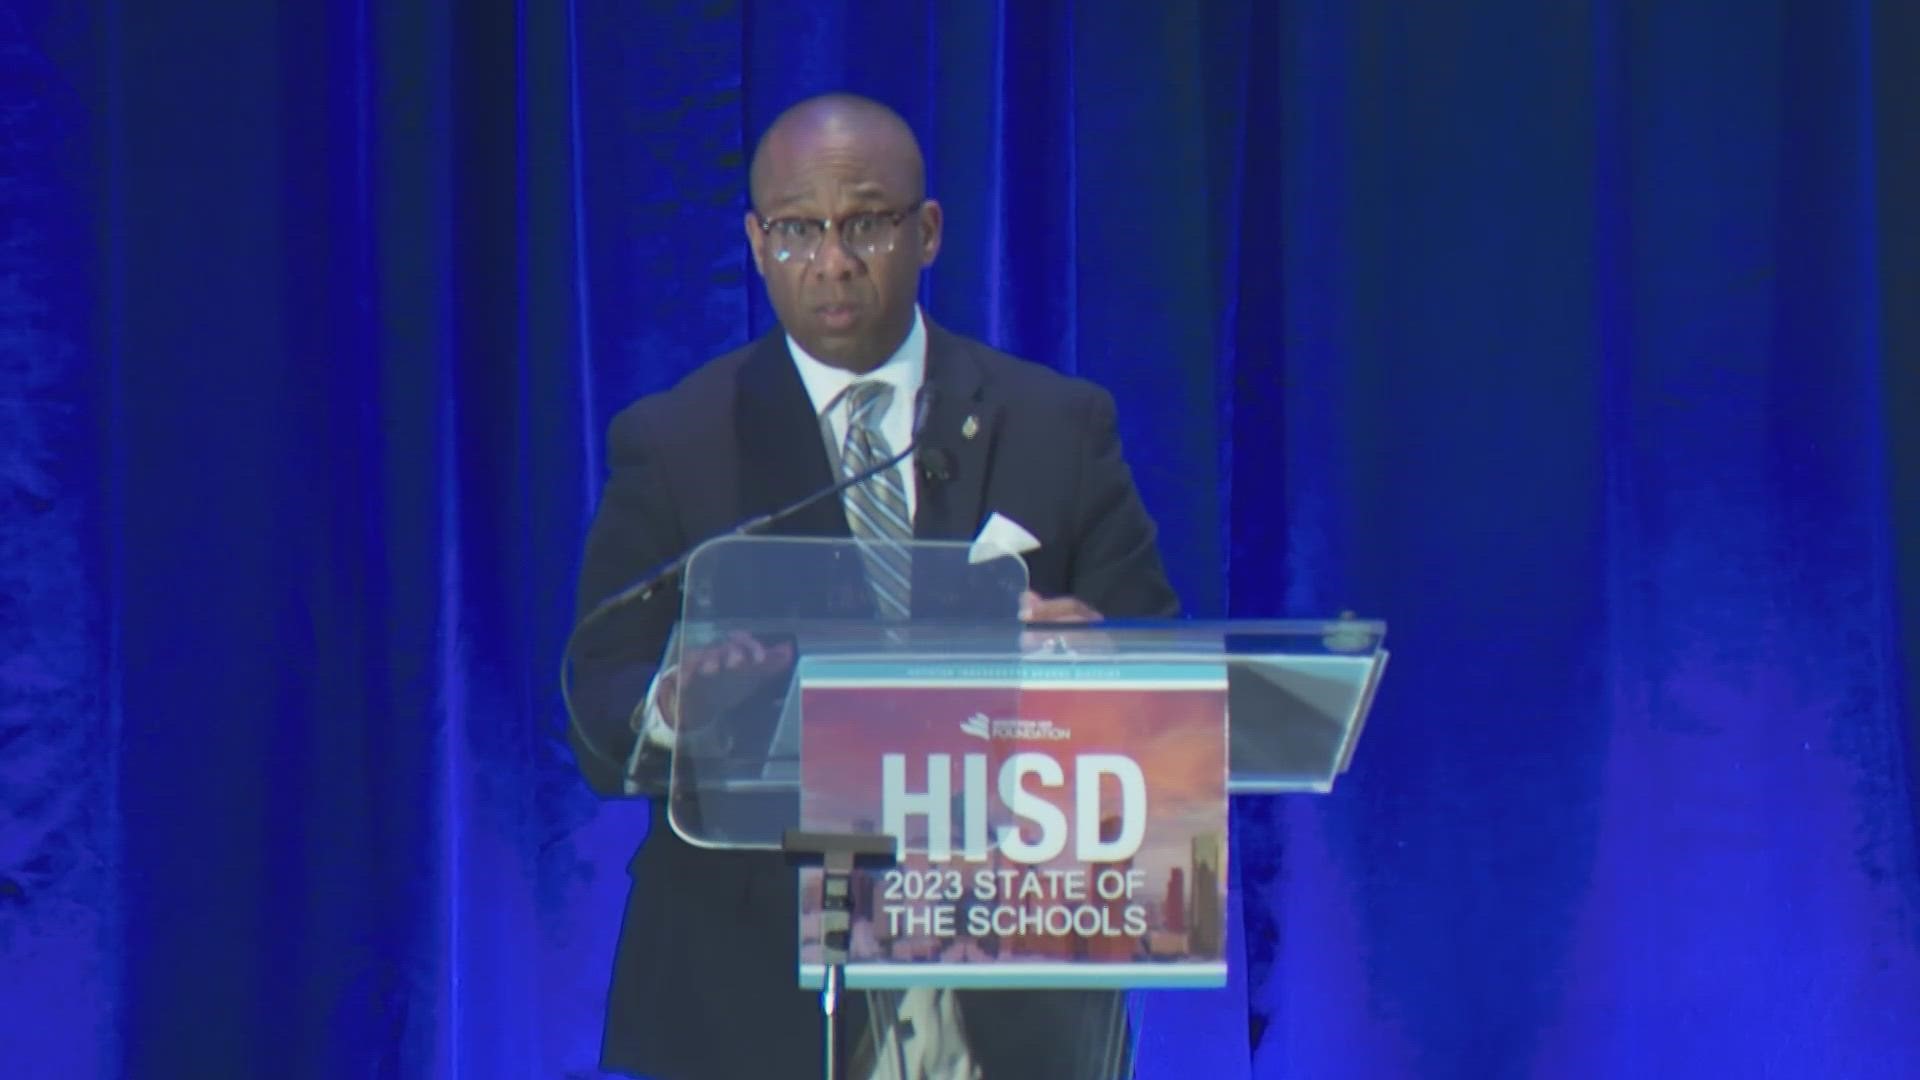 HISD Superintendent Millard House II said the district had not received any official notice from the TEA regarding taking over HISD.